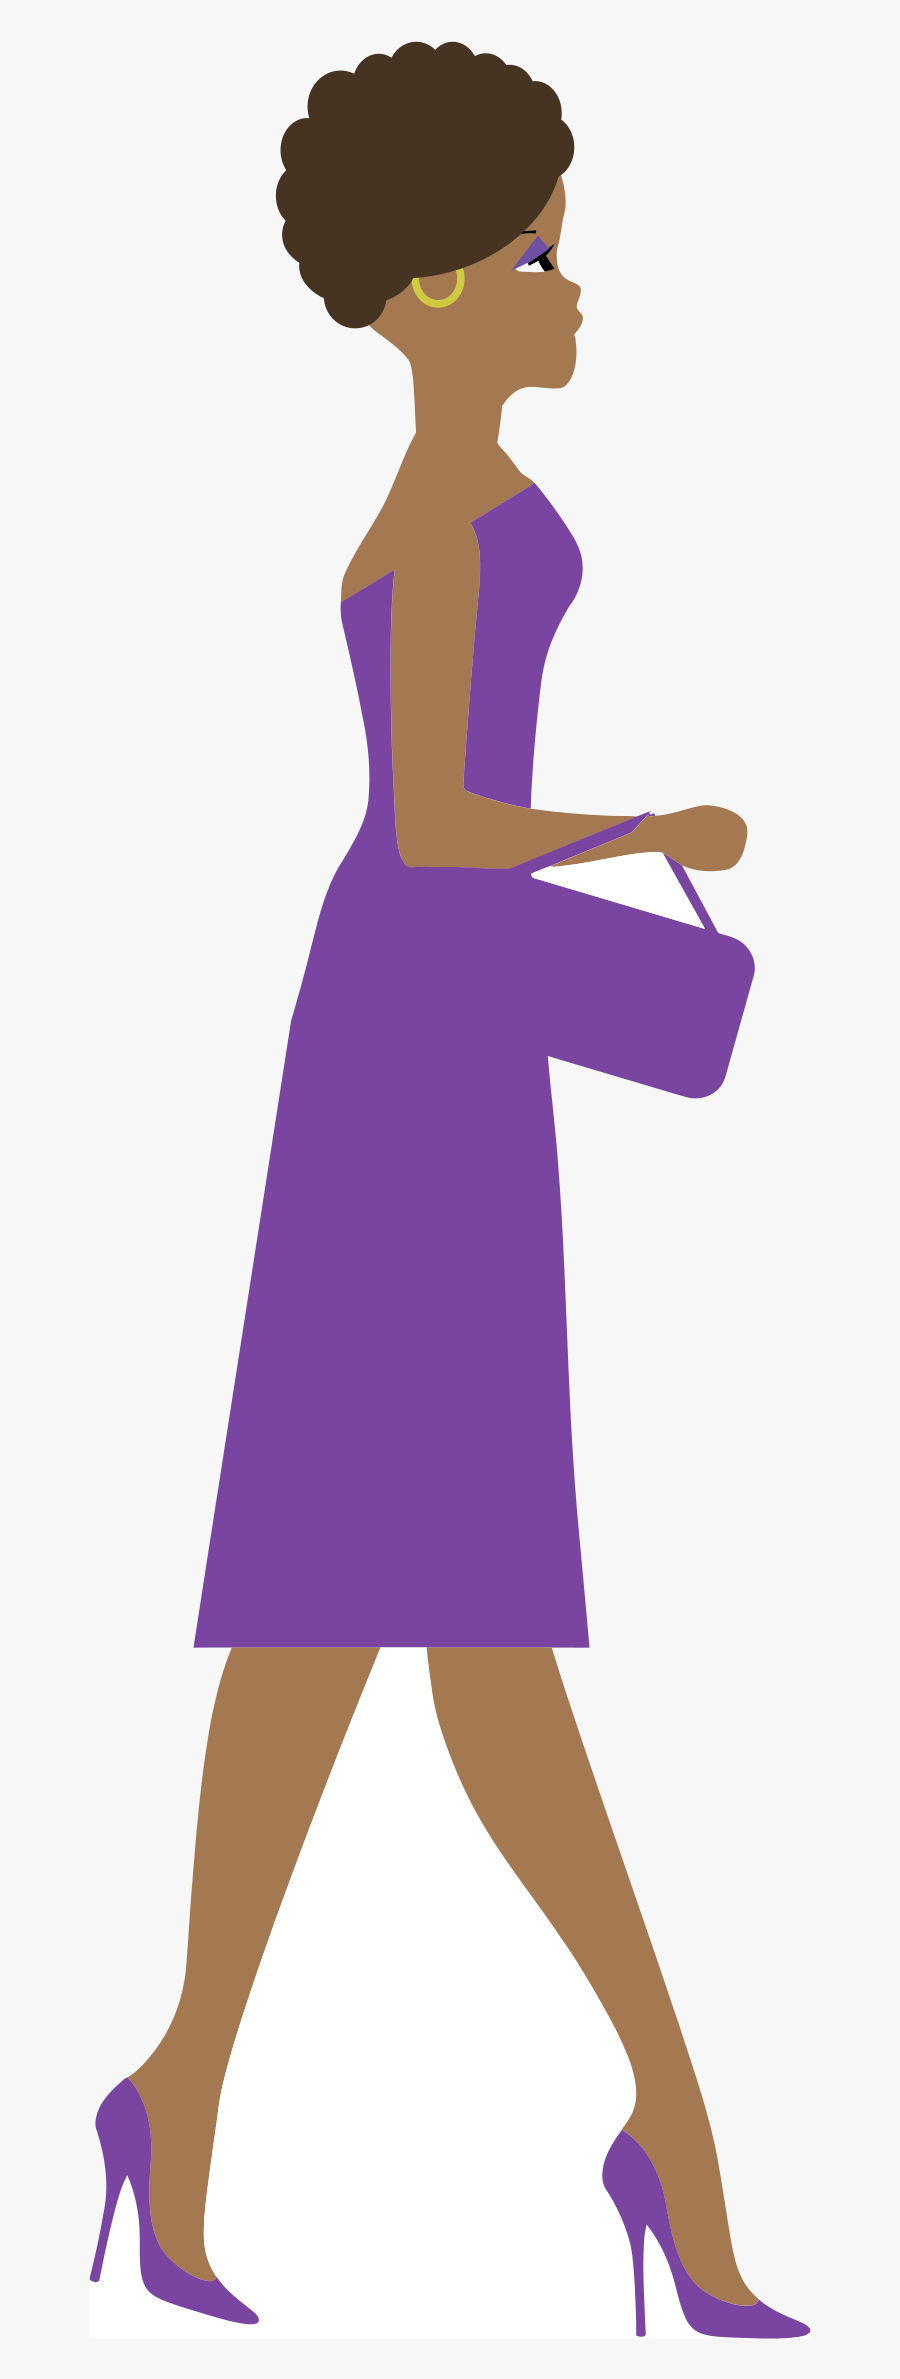 Clip Art Side View Of A Woman - Cartoon Woman Side View, Transparent Clipart